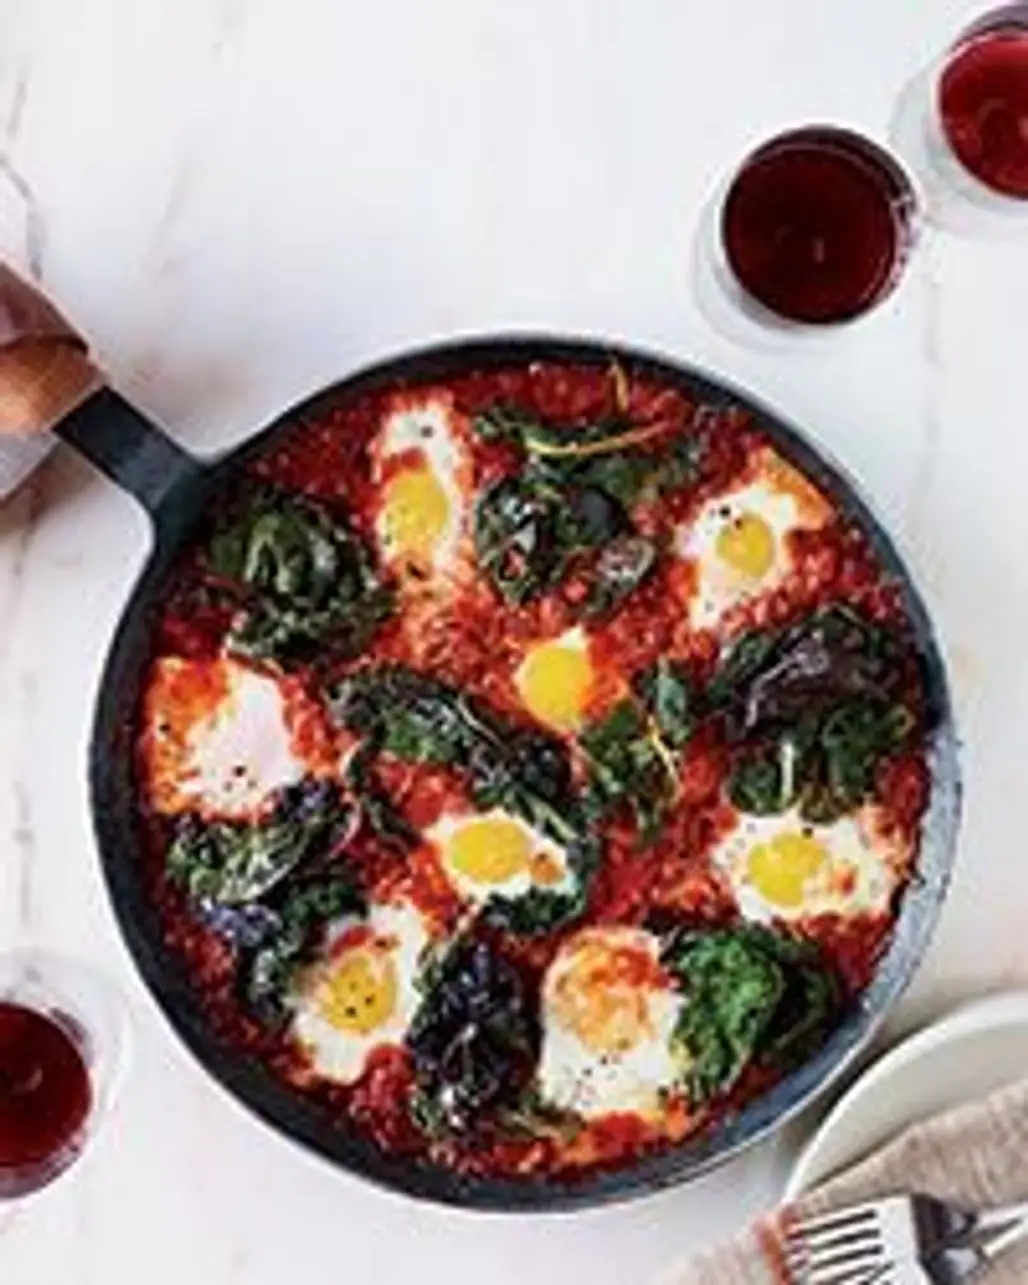 Baked Eggs in Tomato Basil Sauce with Swiss Chard